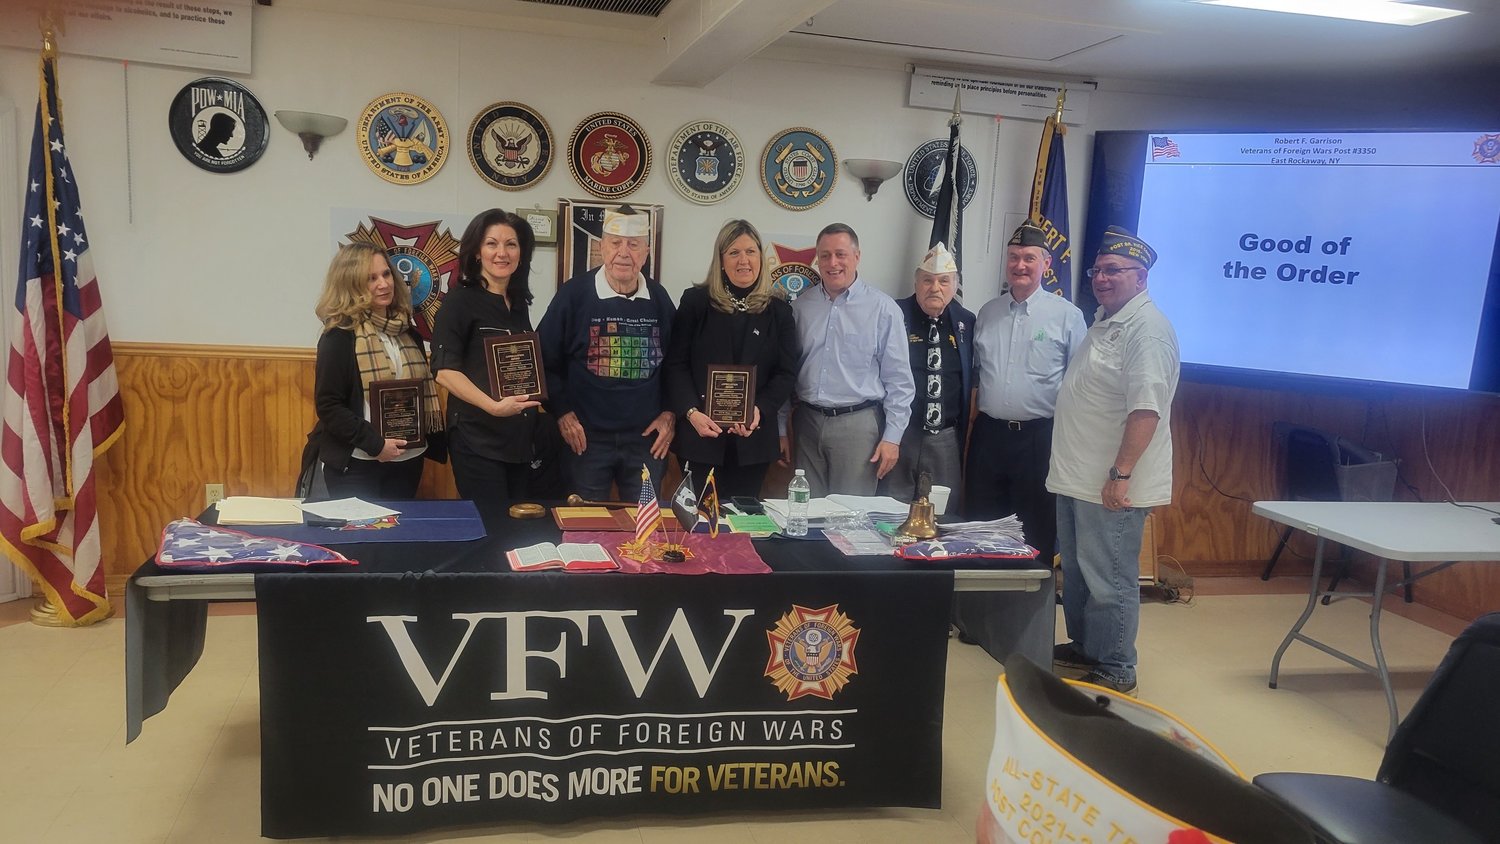 Michele Wachter, left, with Denise Walsh, Post 3350 Commander Joe McCarthy, Maureen Early, Assemblyman Brian Curran, Quartermaster Patrick Iuliucci, 2nd Vice Commander Ed Cook, and Chaplin Frank Colón.